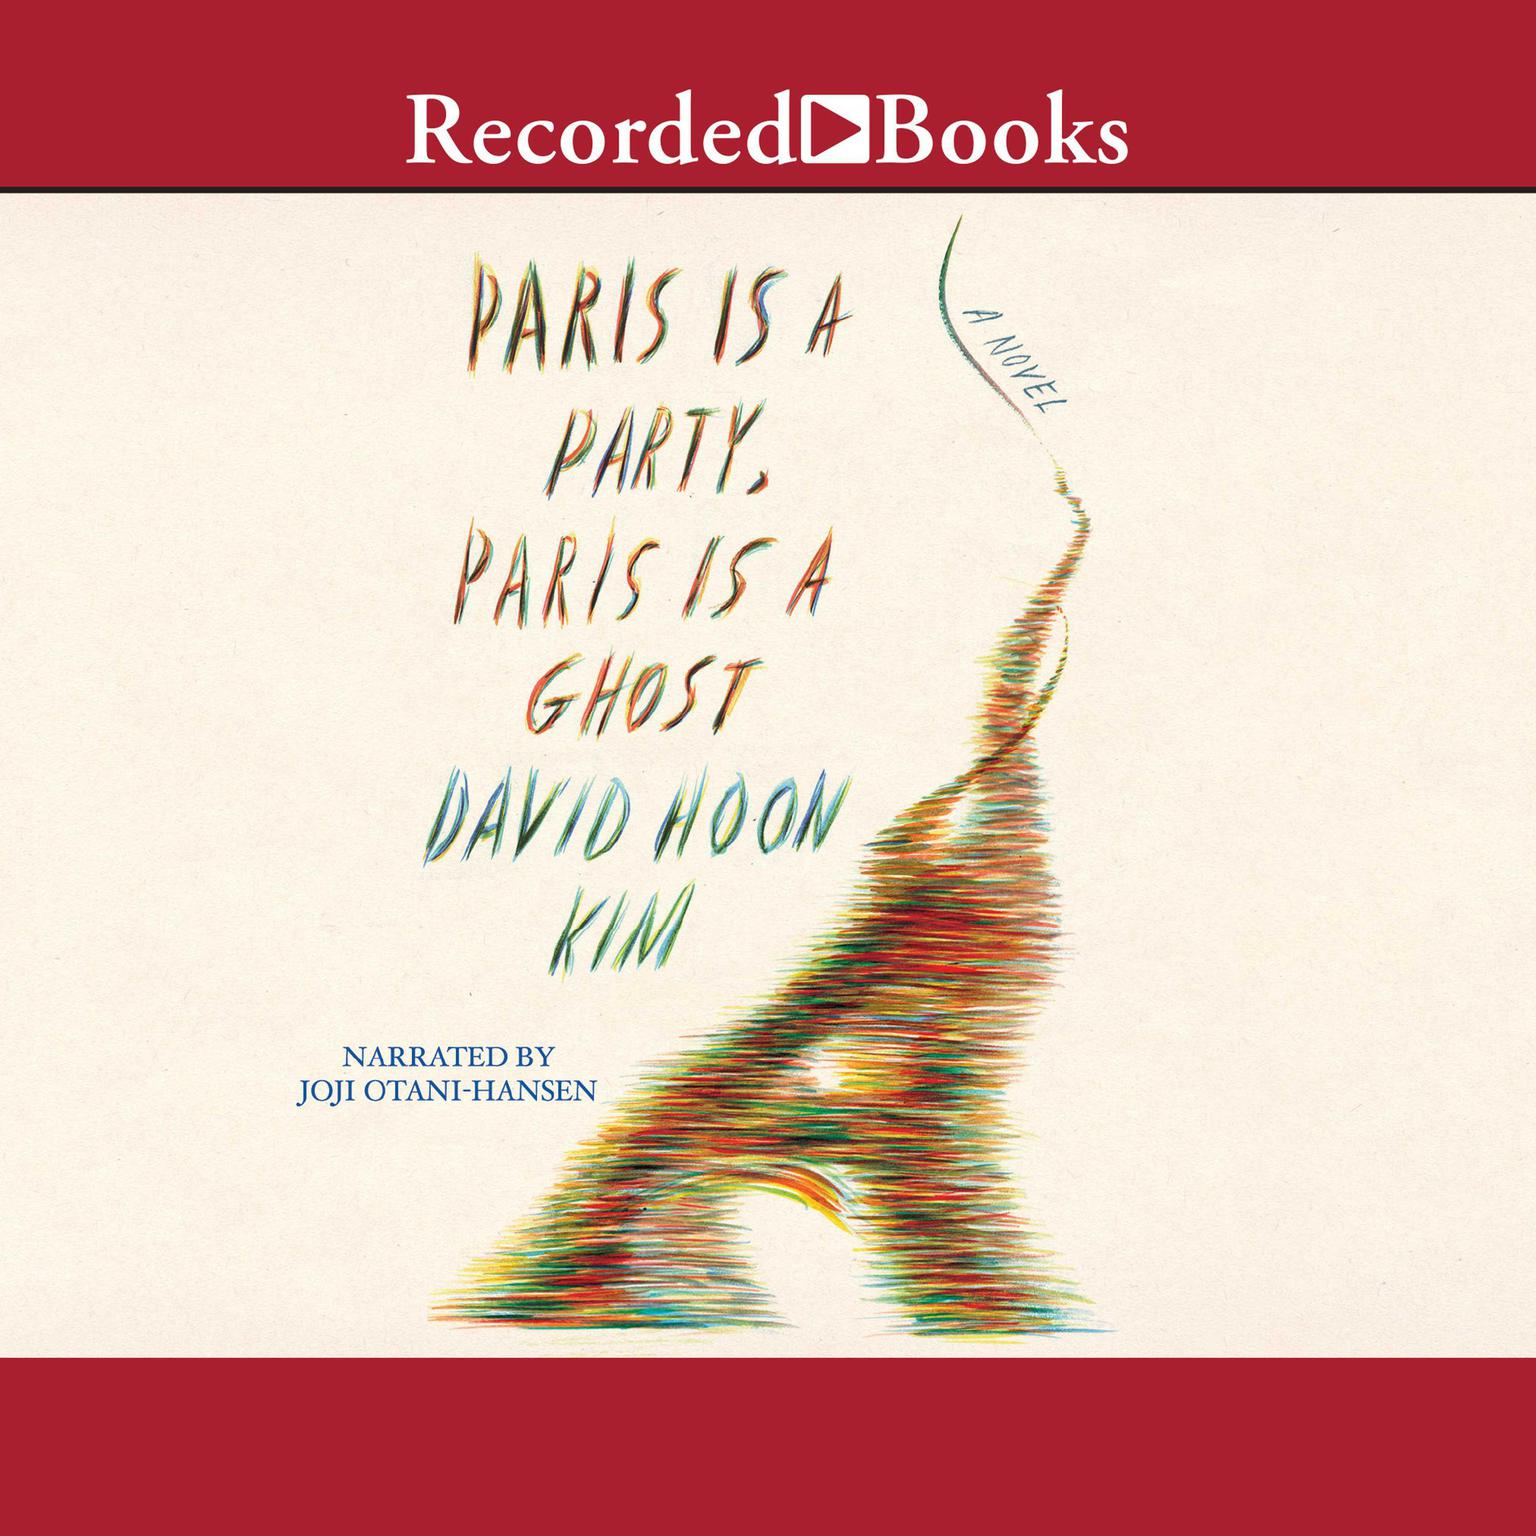 Paris is a Party, Paris is a Ghost Audiobook, by David Hoon Kim